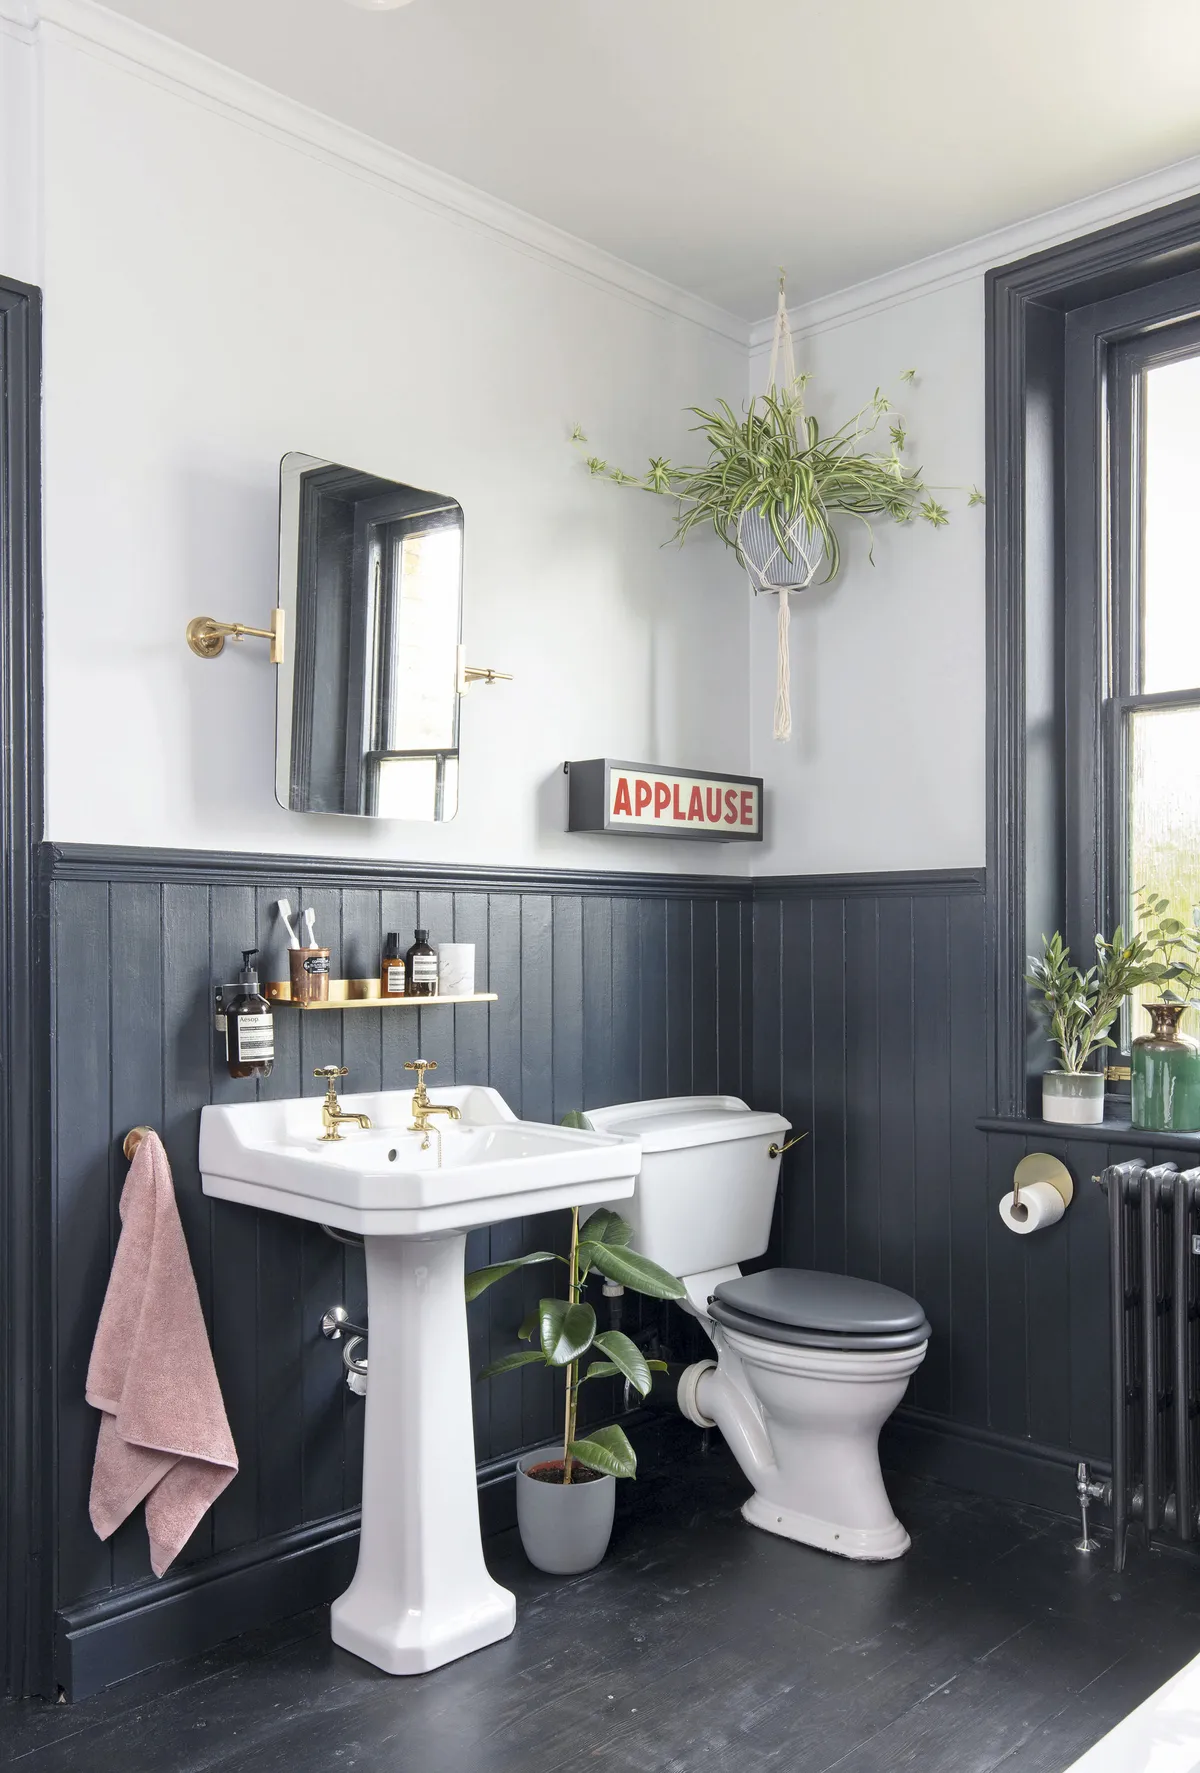 To prevent the bathroom looking too dark, the couple decided to paint just the panelling in Farrow & Ball’s Railings, leaving the top half of the walls a crisp white to give the space a fresh look